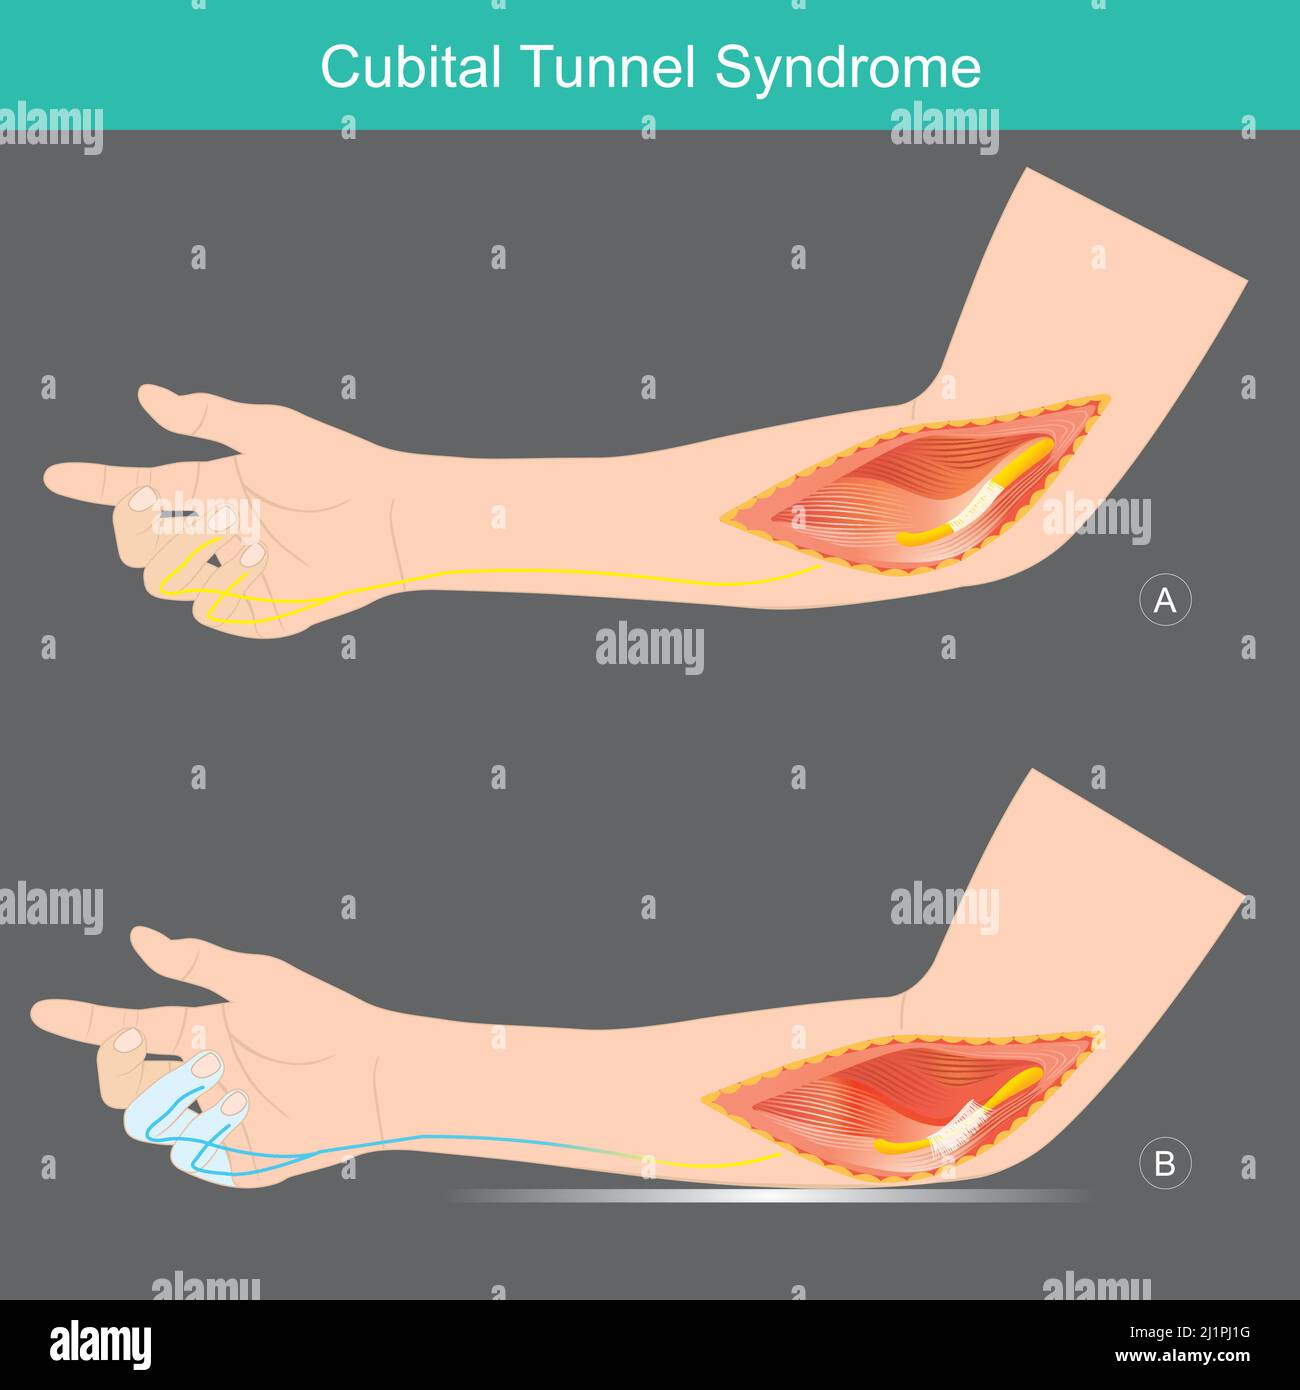 Cubital Tunnel Syndrome. A condition that involves pressure or stretching of the ulnar nerve in arms which can cause numbness or tingling in the ring Stock Vector